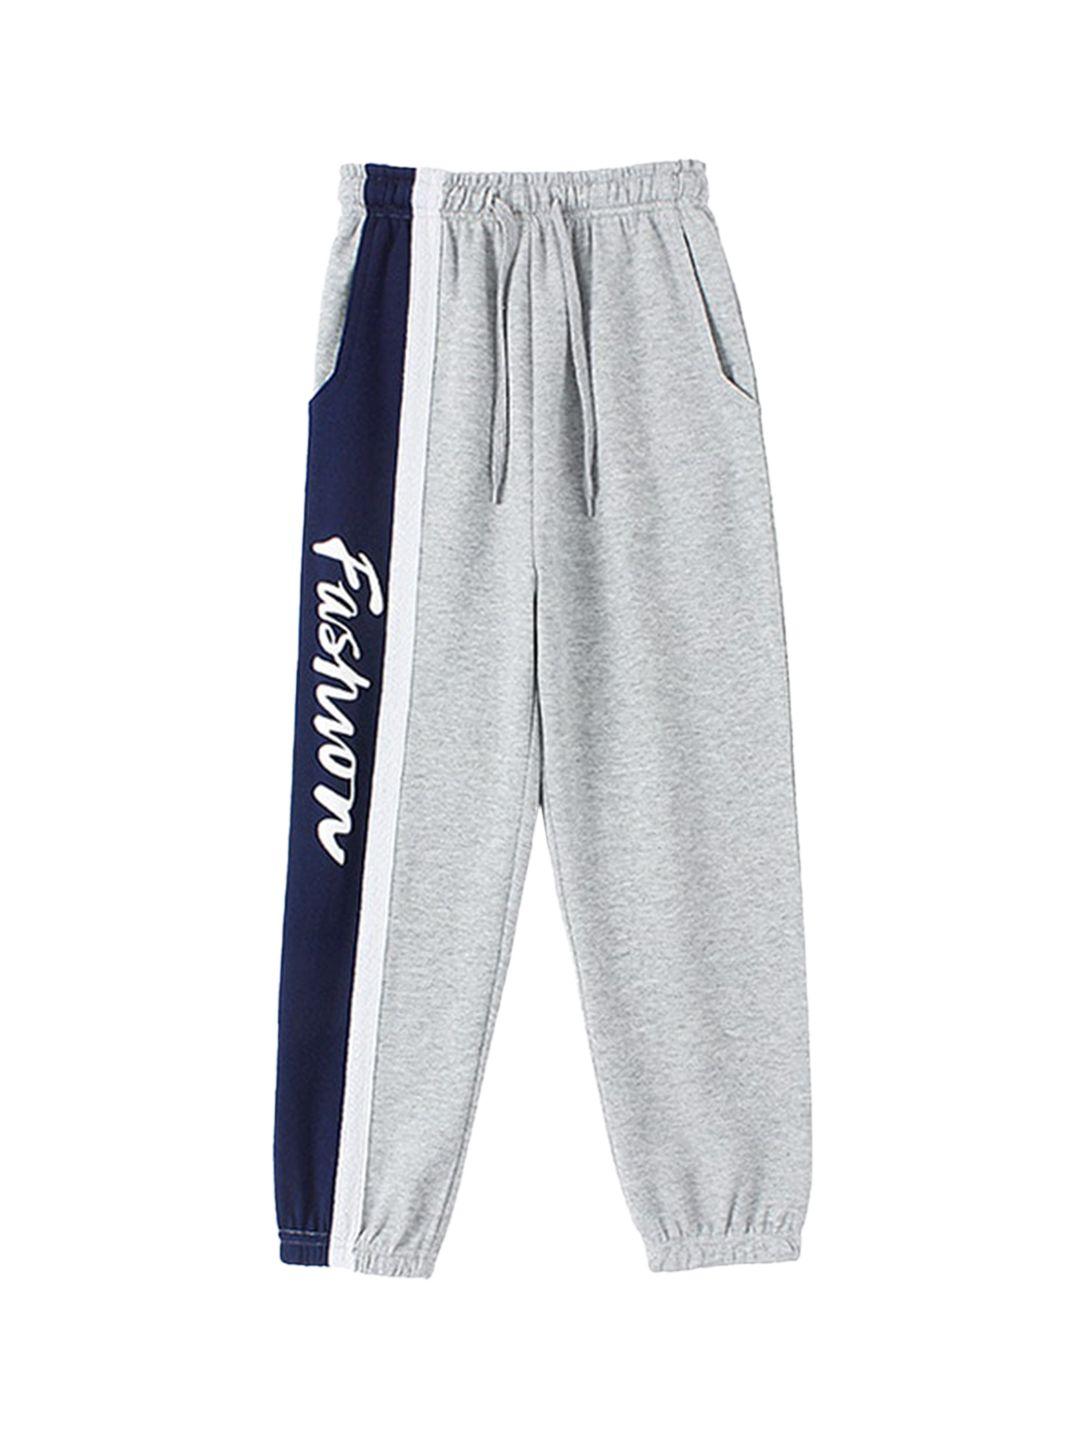 stylecast-boys-grey-typography-printed-easy-wash-cotton-joggers